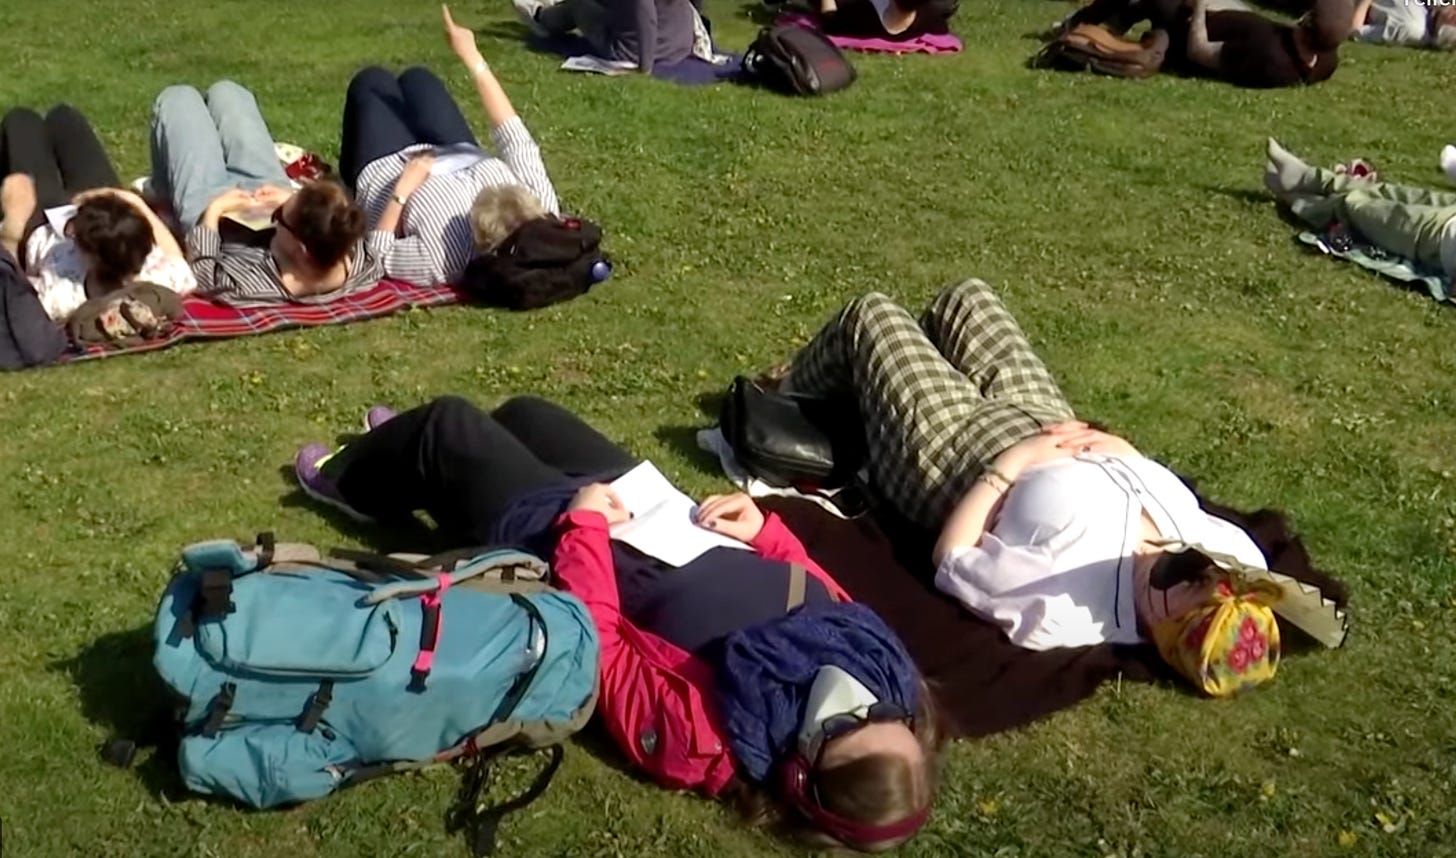 Hundreds of Middle-Aged German Women Lie Down on a Lawn in Berlin to Protest Long Covid Https%3A%2F%2Fsubstack-post-media.s3.amazonaws.com%2Fpublic%2Fimages%2Fc18c2a17-16d4-44e1-9dd4-30ce09b1b832_2430x1432